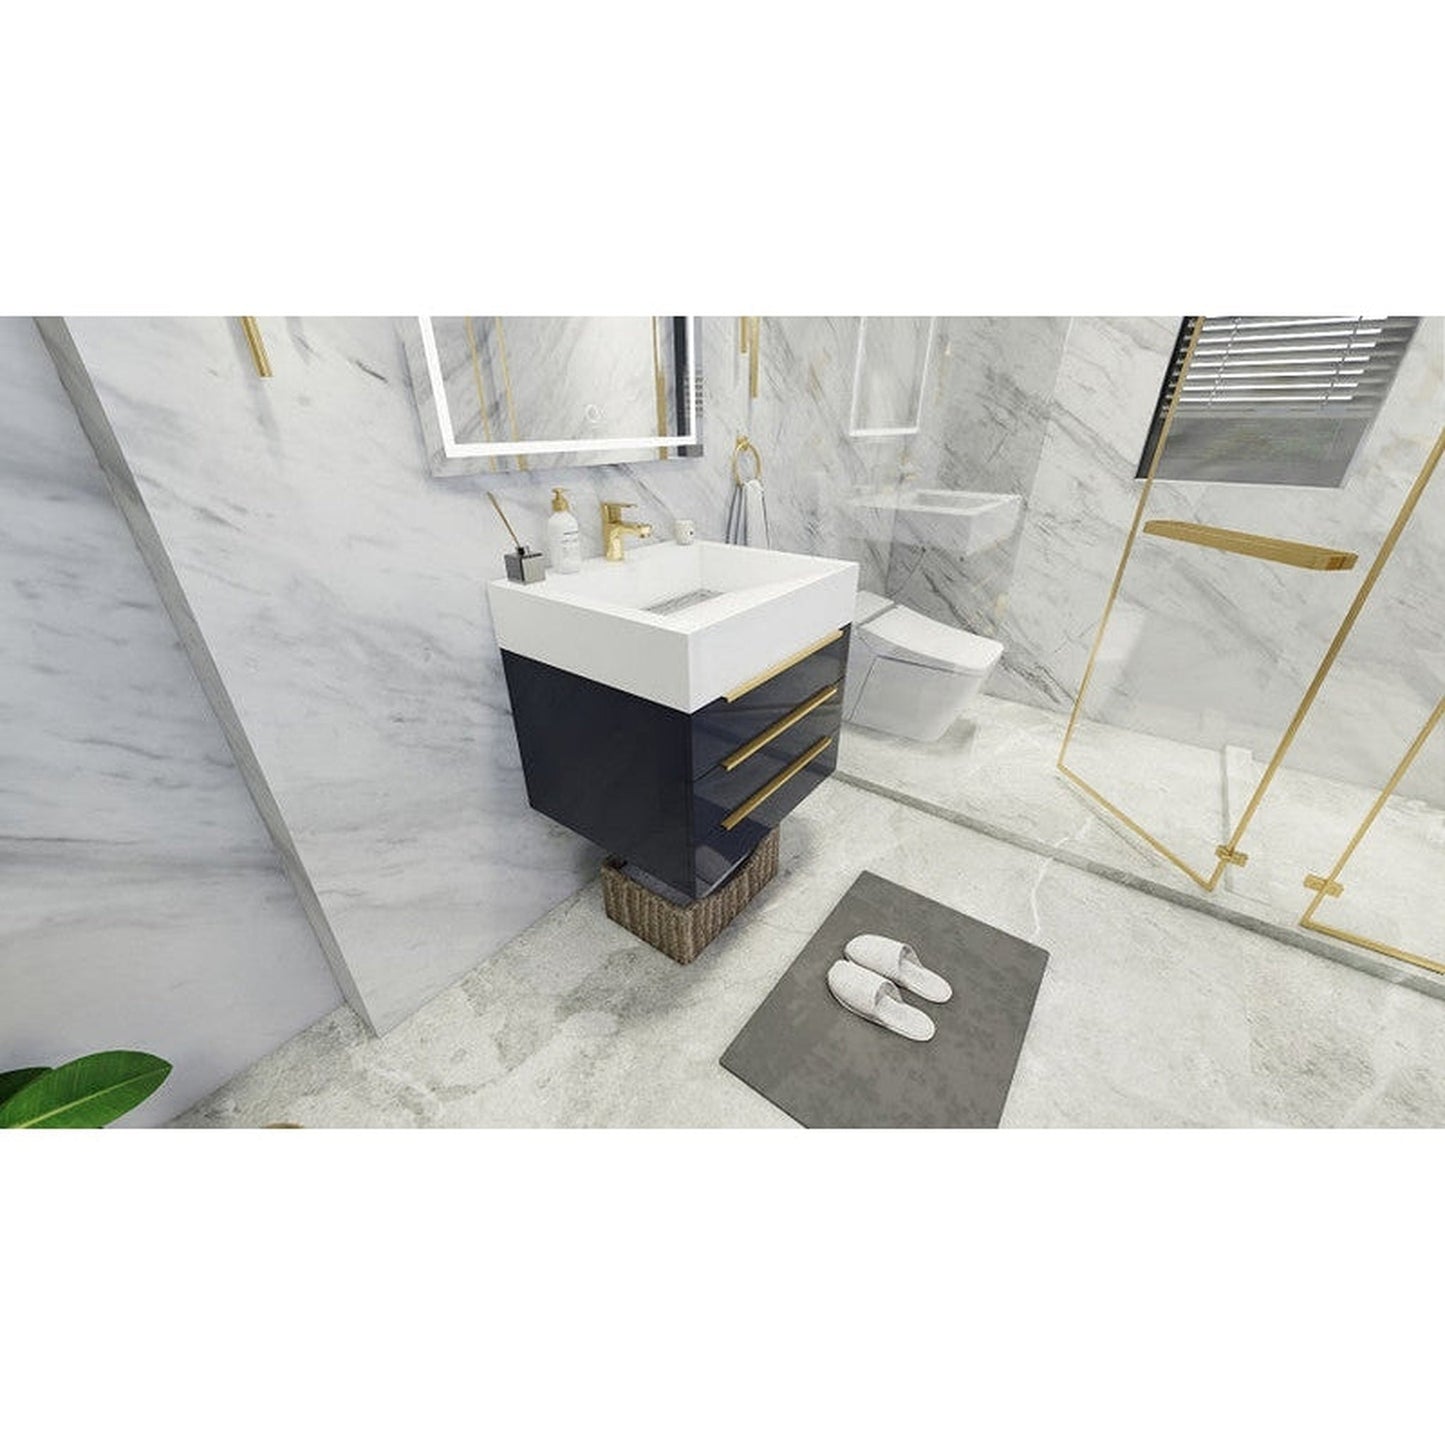 Moreno Bath Bethany 24" High Gloss Gray Wall-Mounted Vanity With Single Reinforced White Acrylic Sink